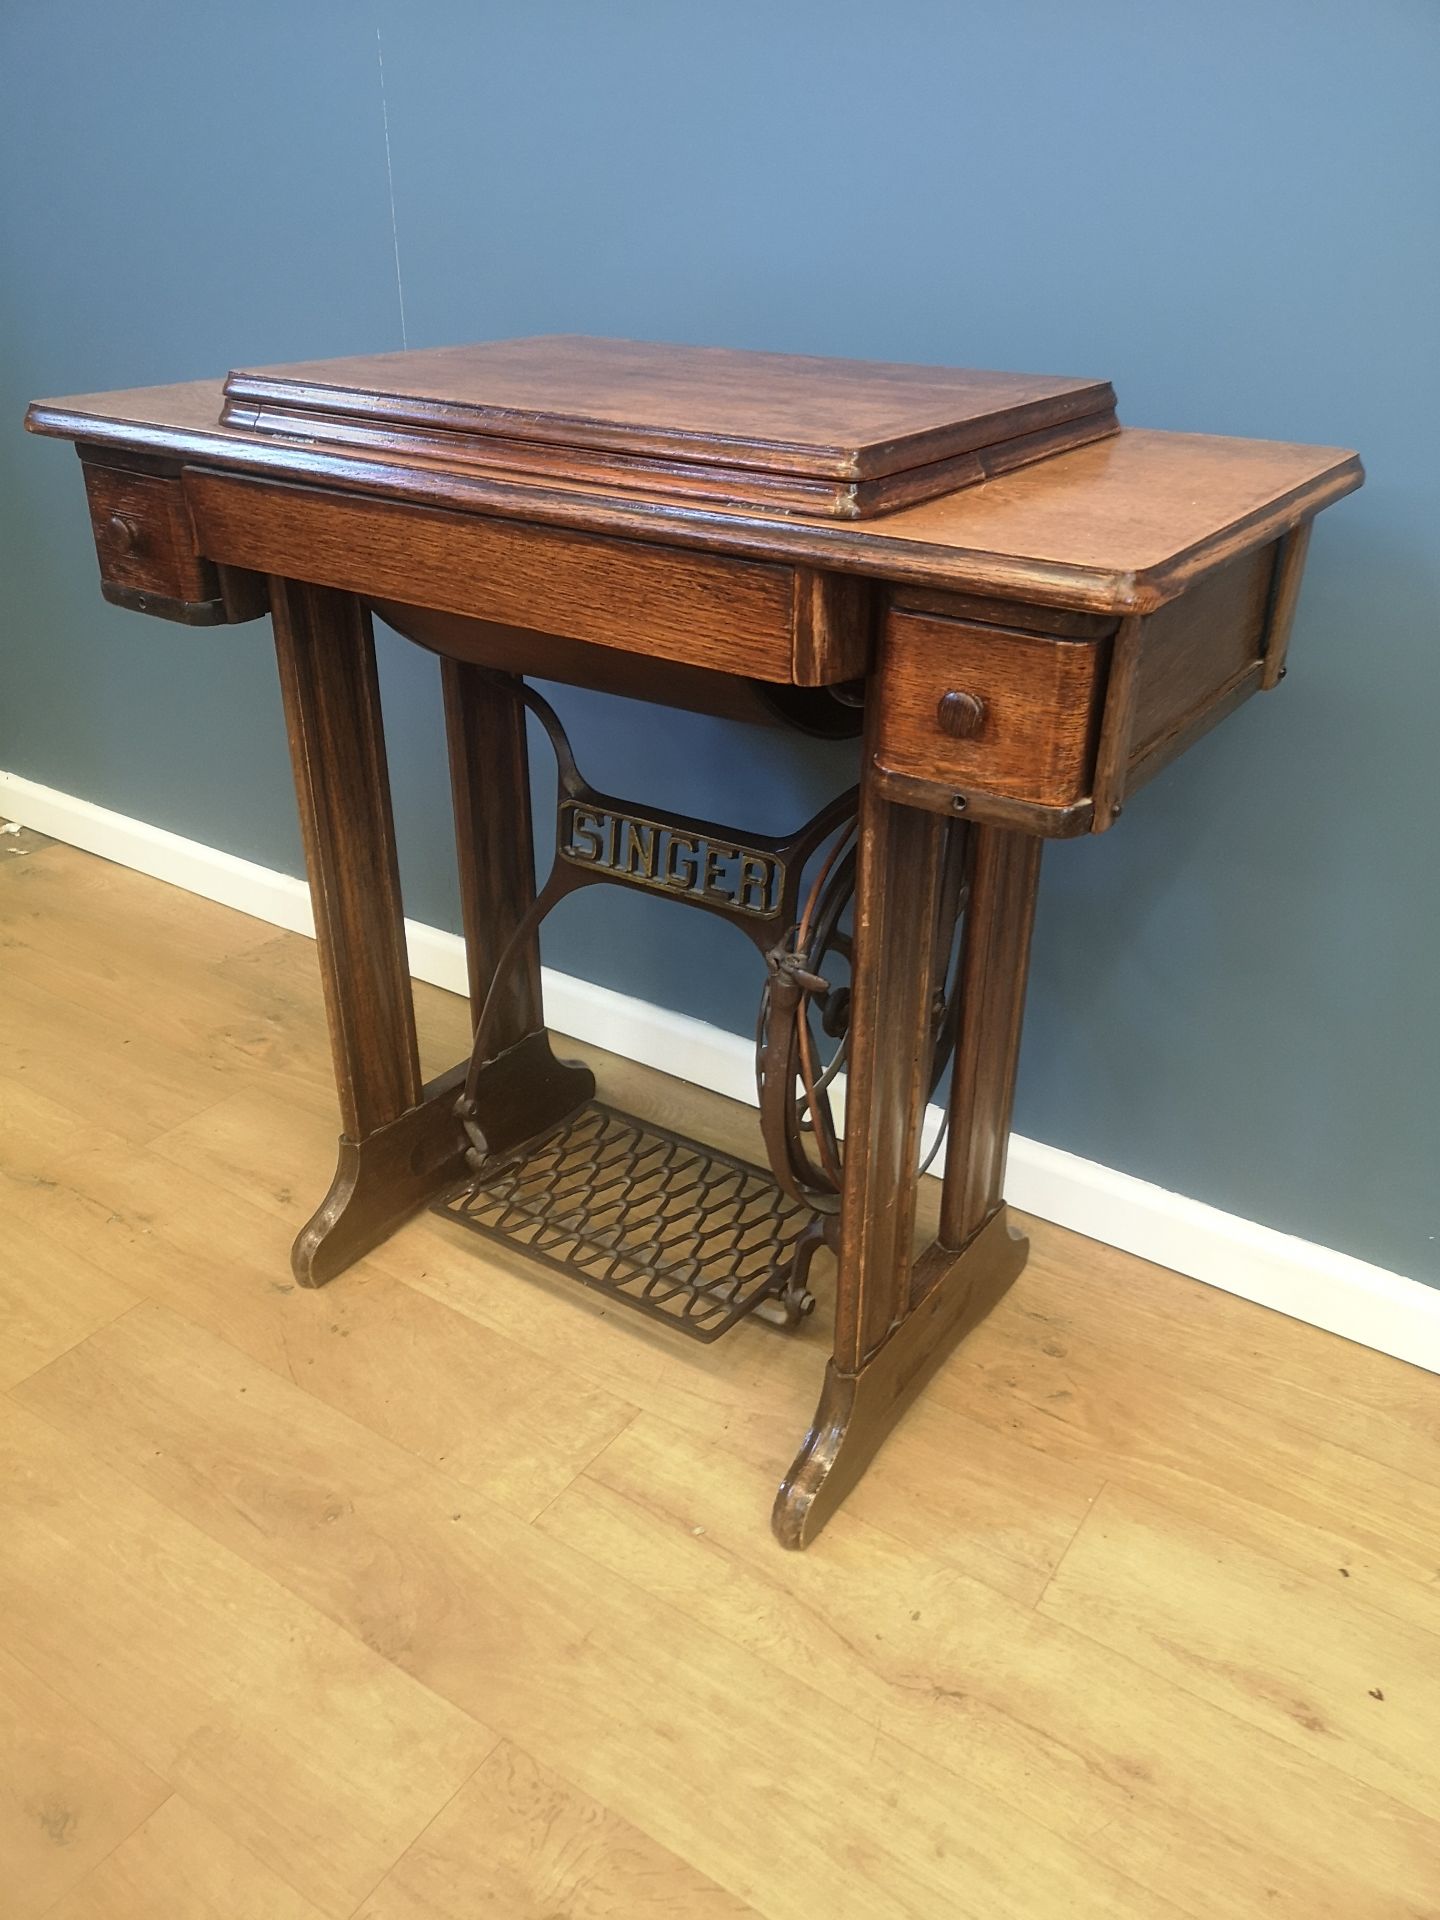 Singer sewing machine set in an oak treadle table - Image 2 of 7